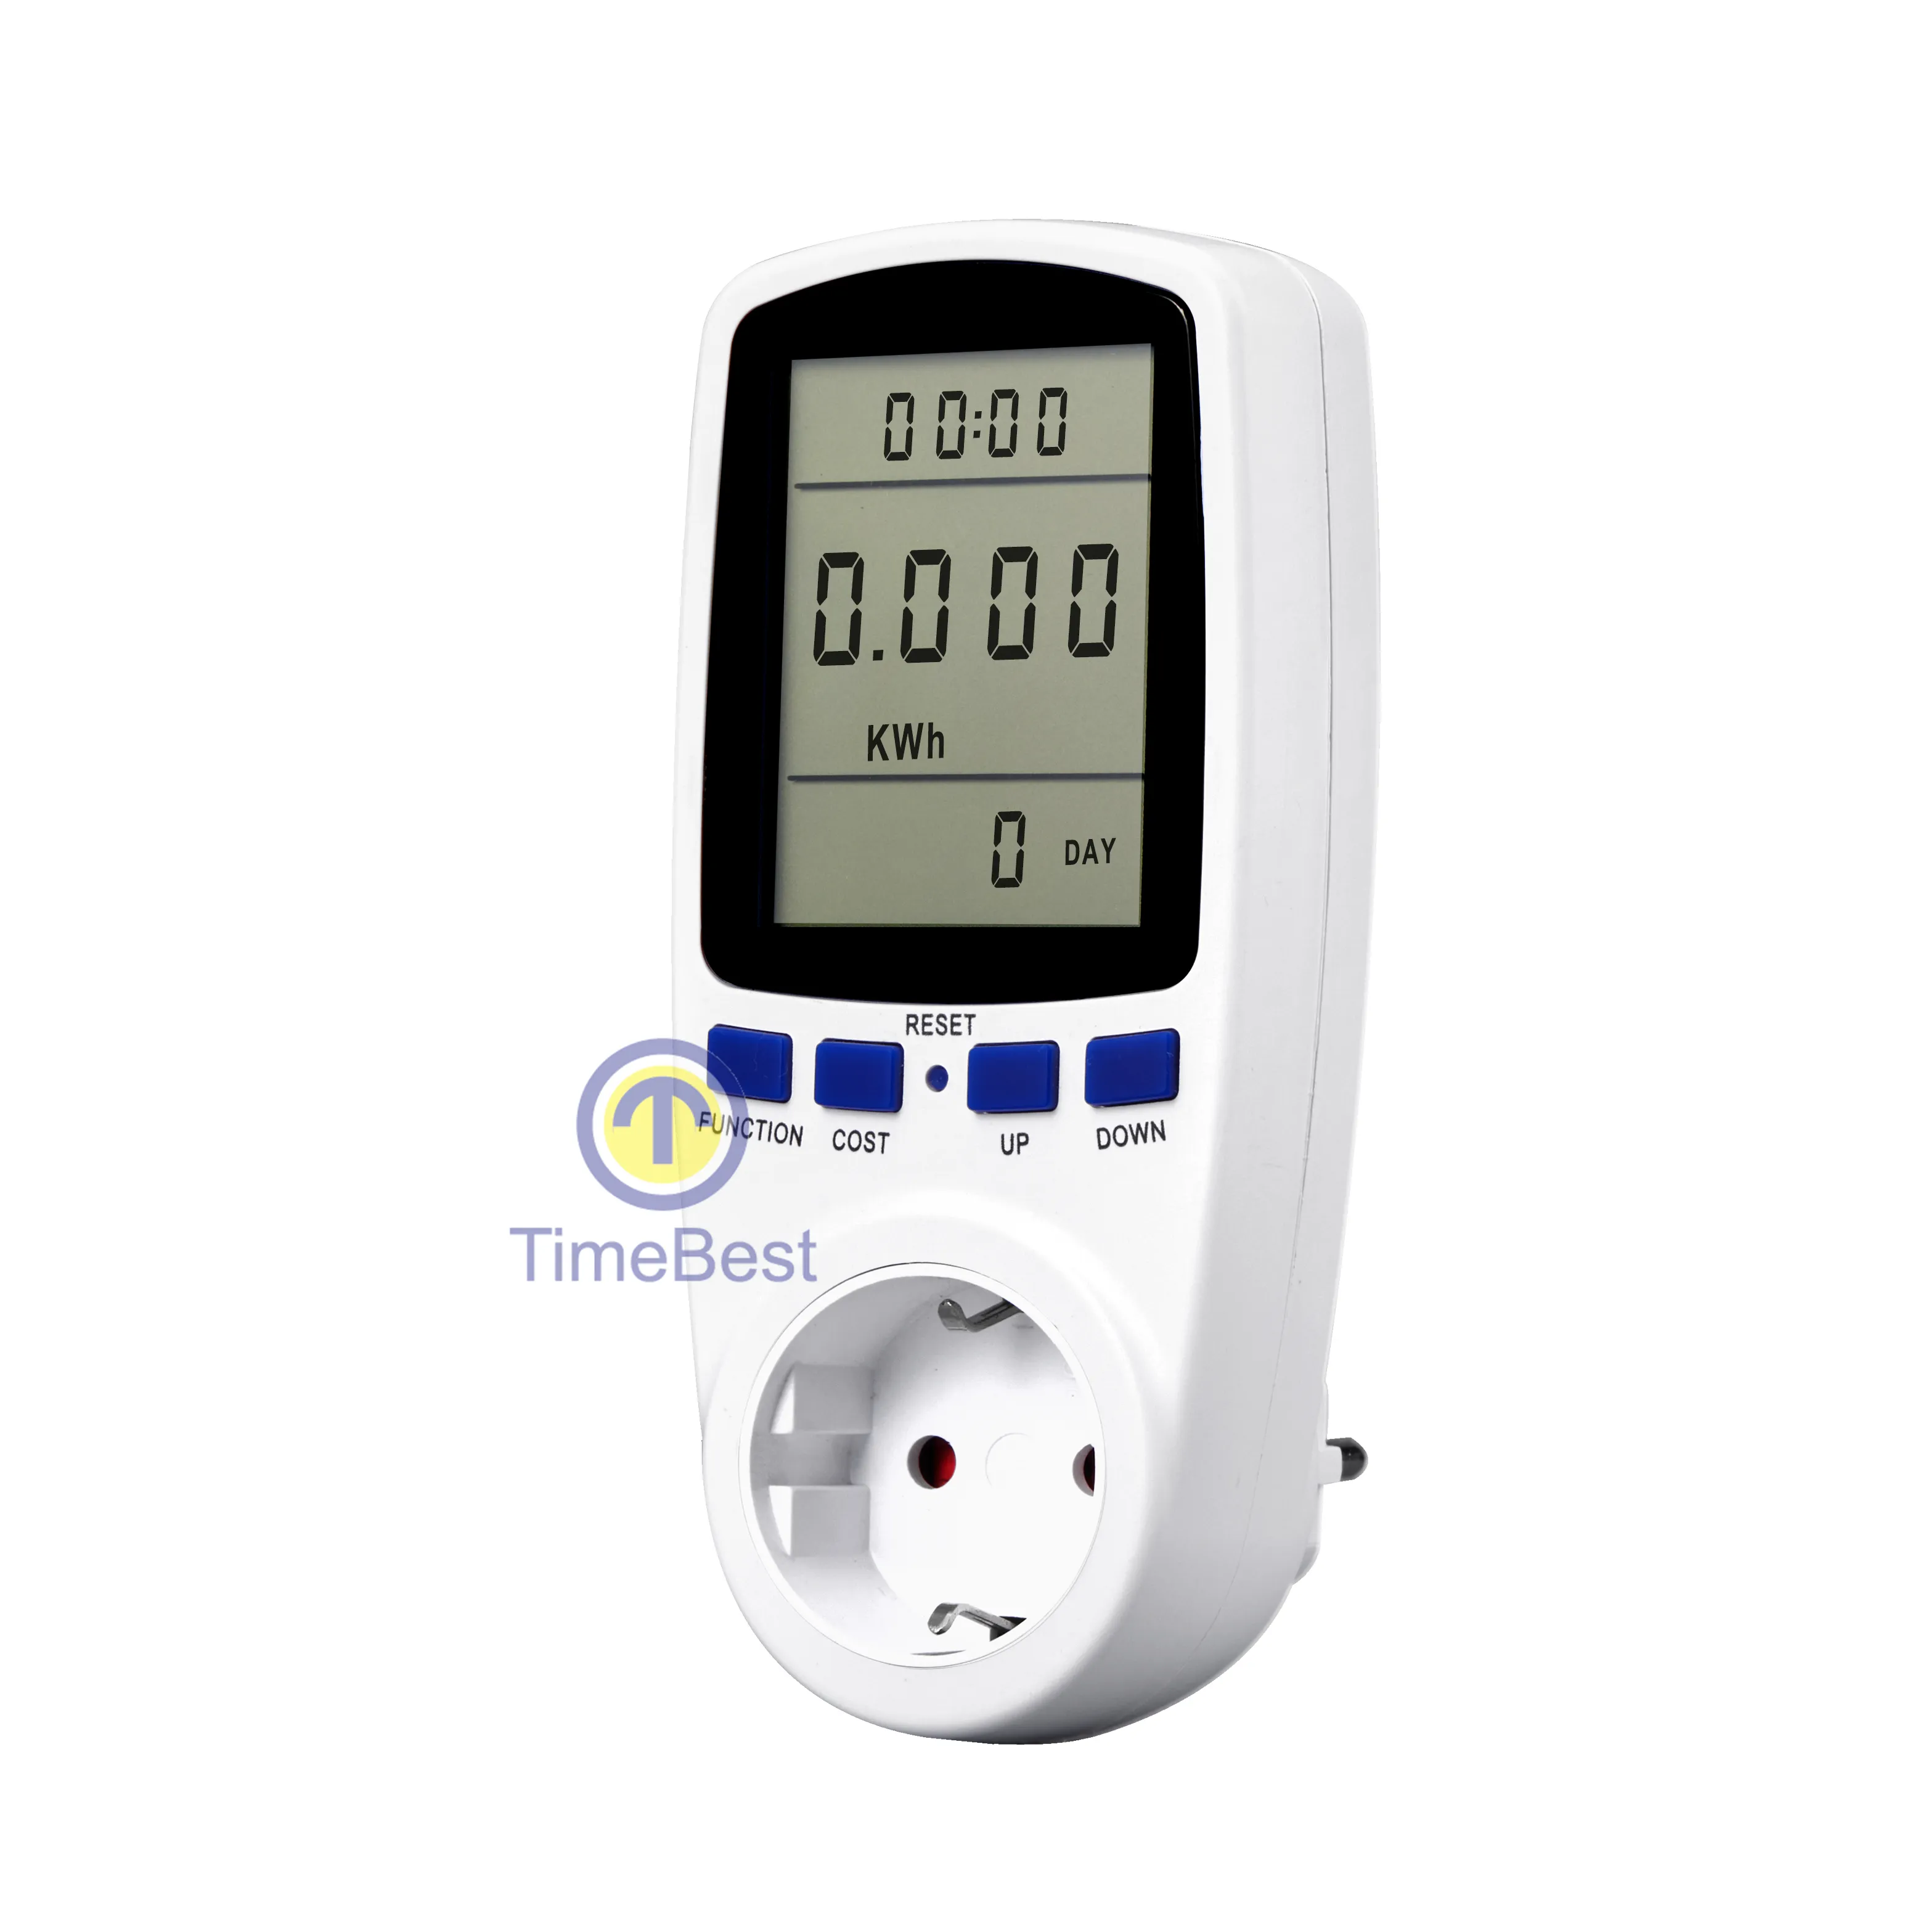 Power meter Energy Counter Consumption Usage Monitor Plug